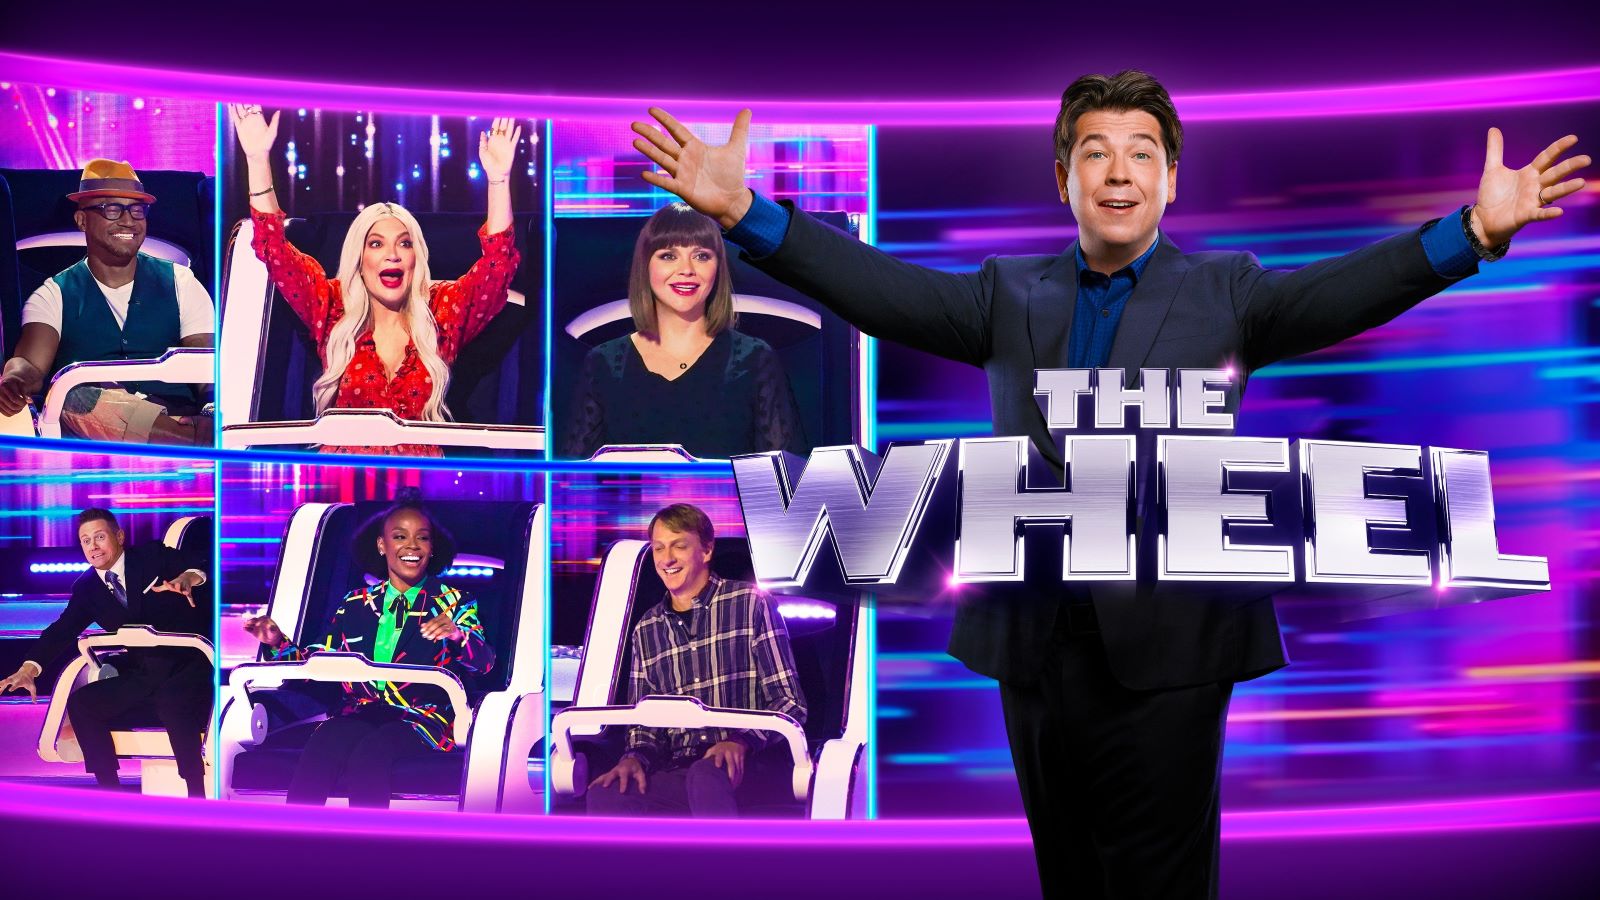 How to Watch The Wheel Online Stream the New Game Show From Anywhere